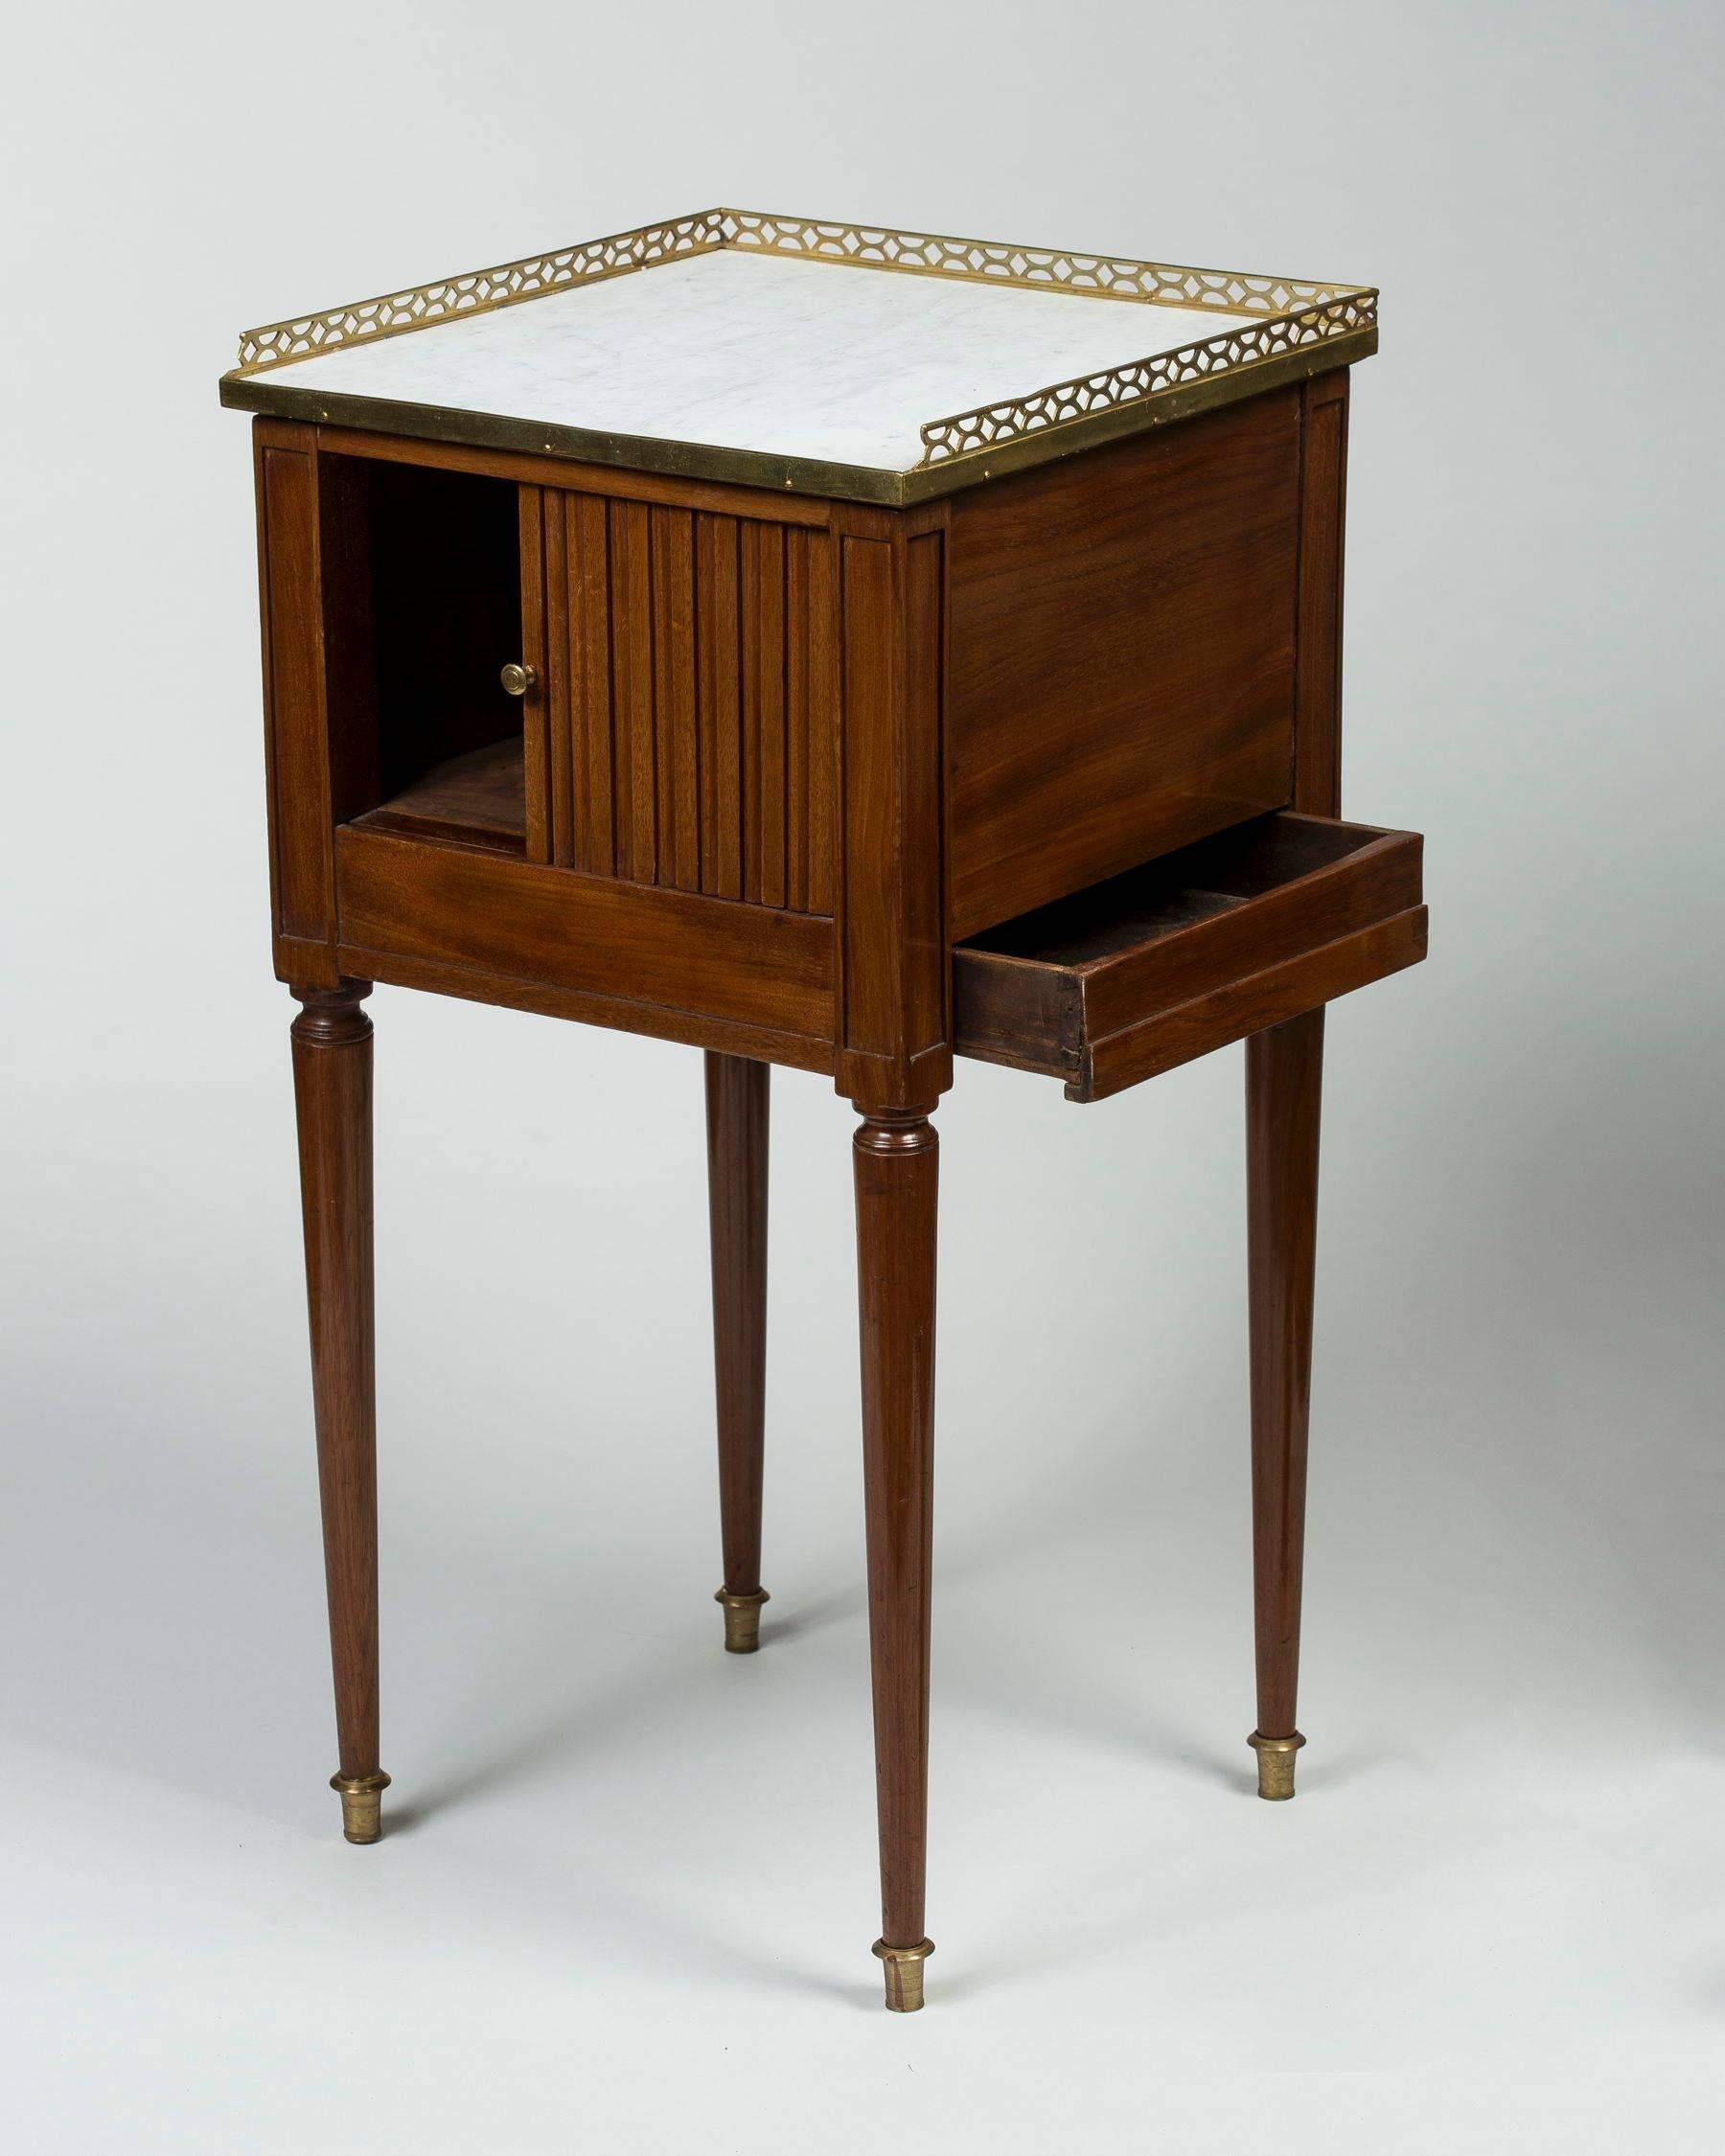 The square veined white marble-top and brass gallery above a tambour door and a side drawer, the turned tapering legs terminating in brass caps.